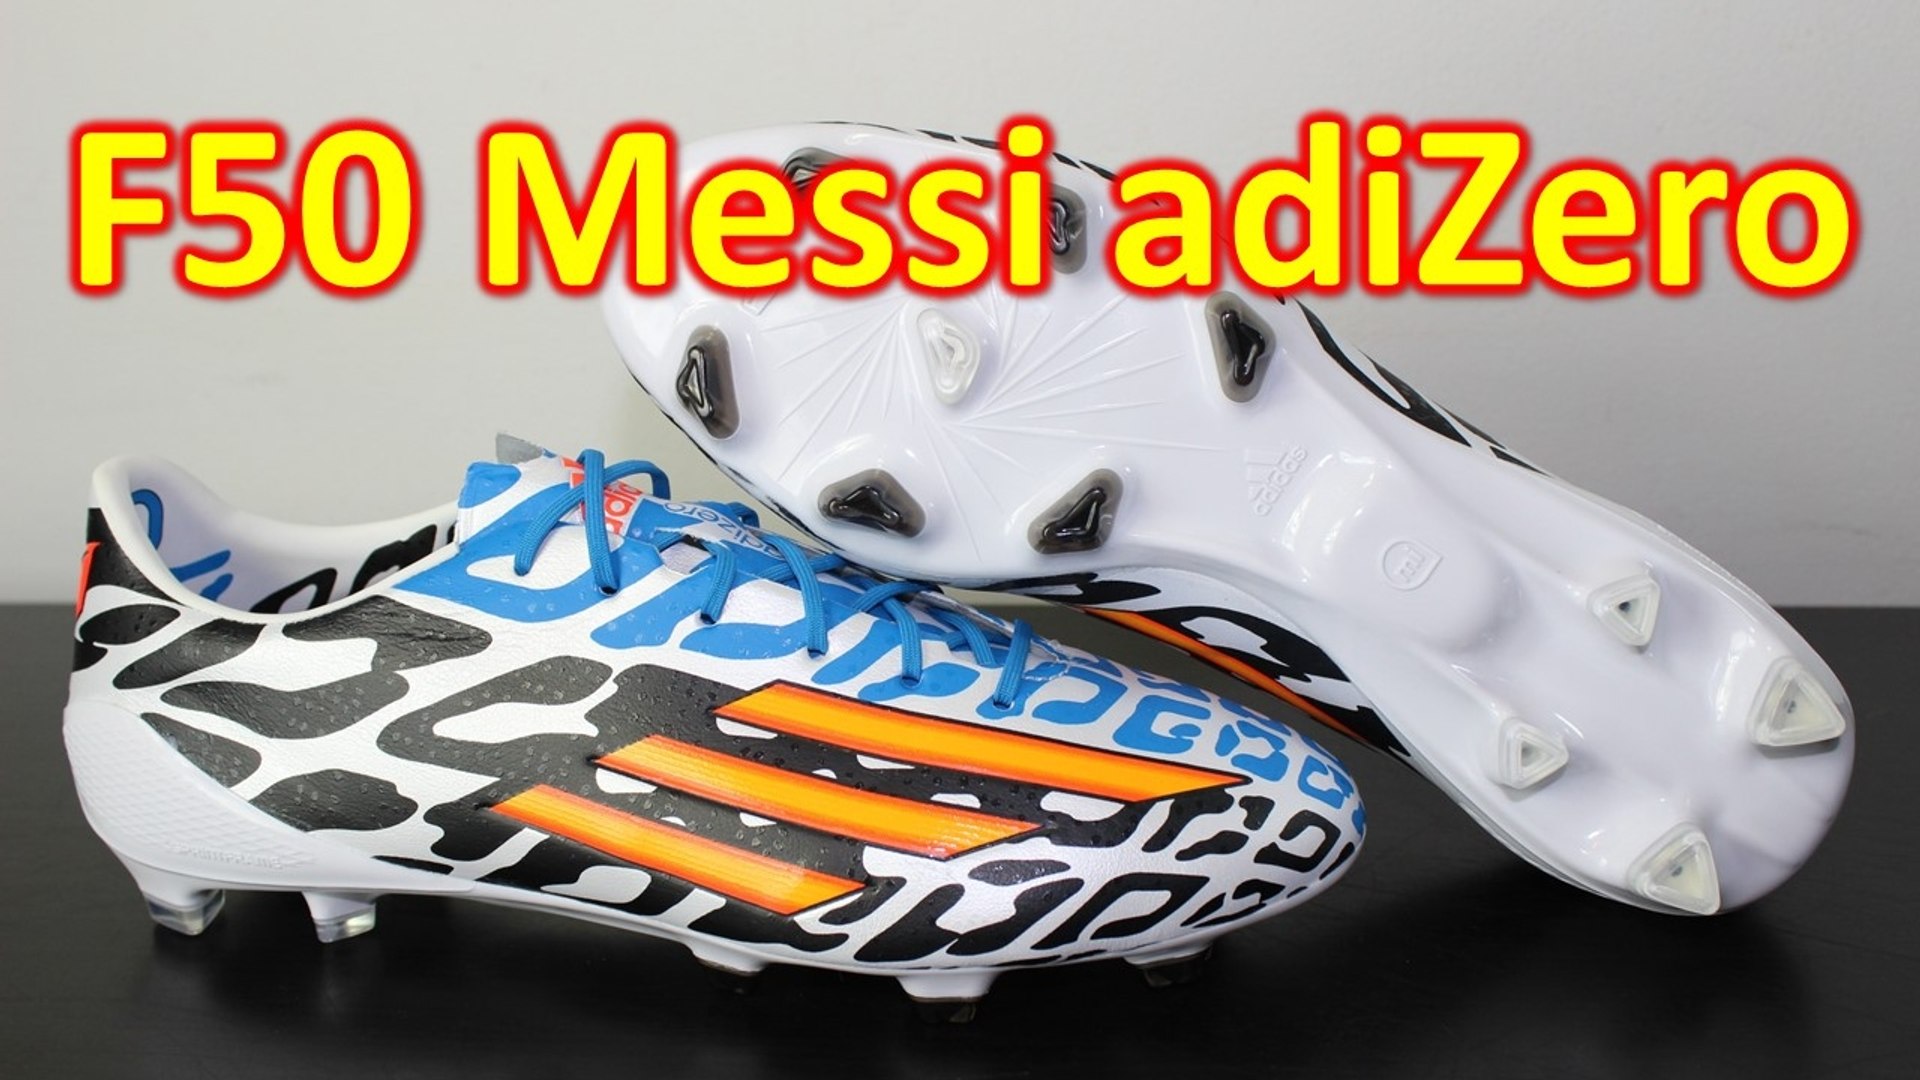 Messi Adidas F50 adizero Battle Pack - Unboxing + On Feet - video  Dailymotion